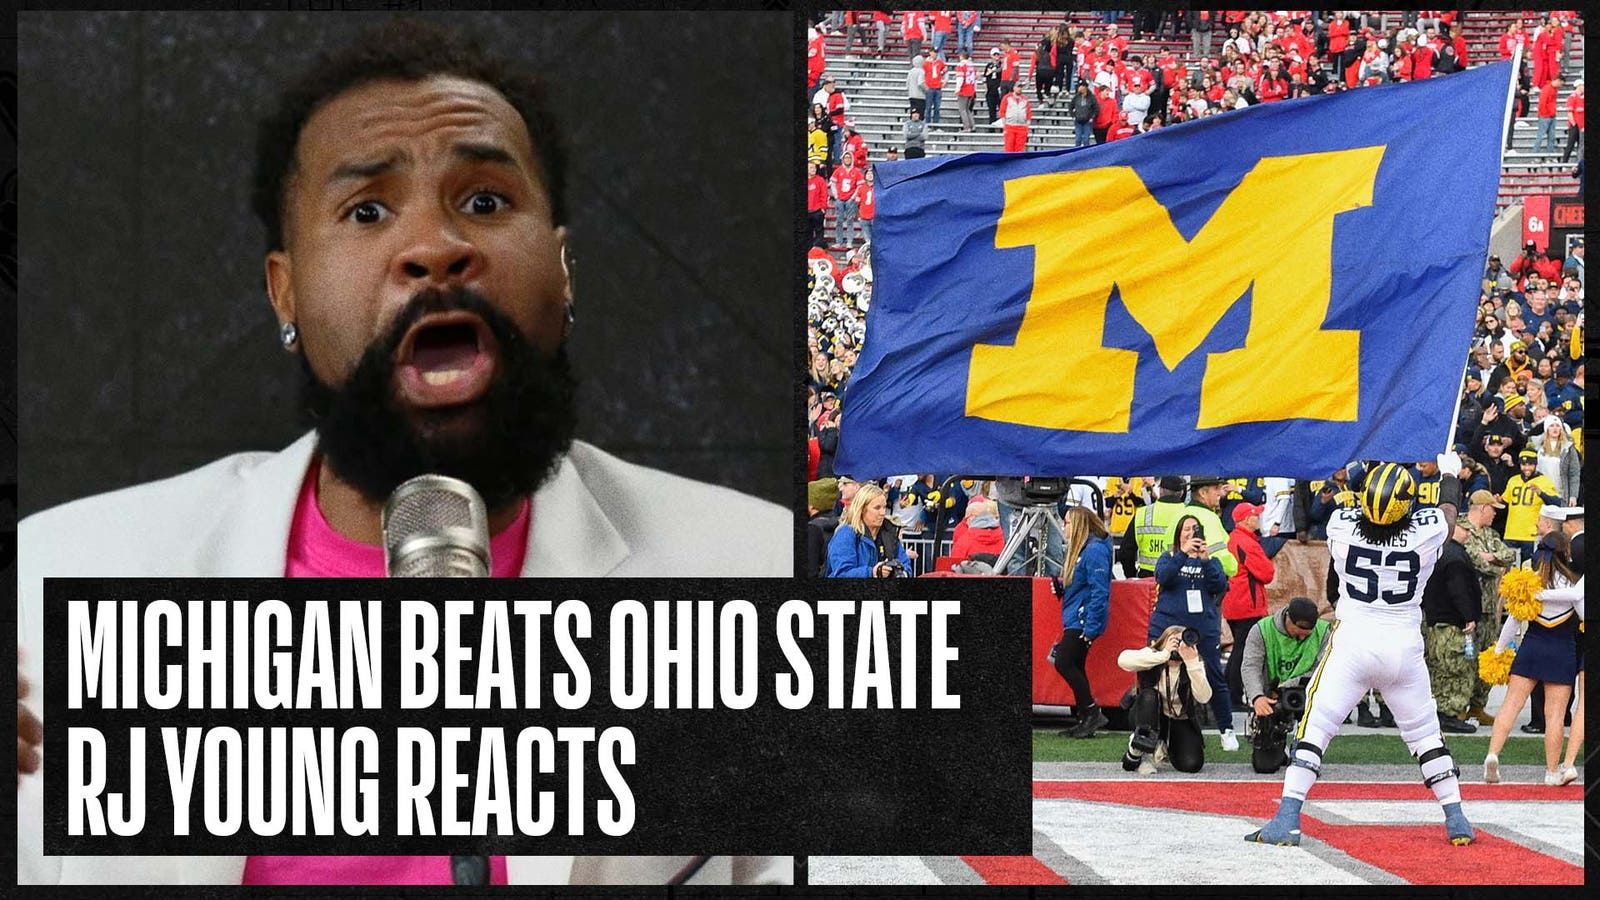 Michigan routs Ohio State: Are the Wolverines the No. 1 team in the country?